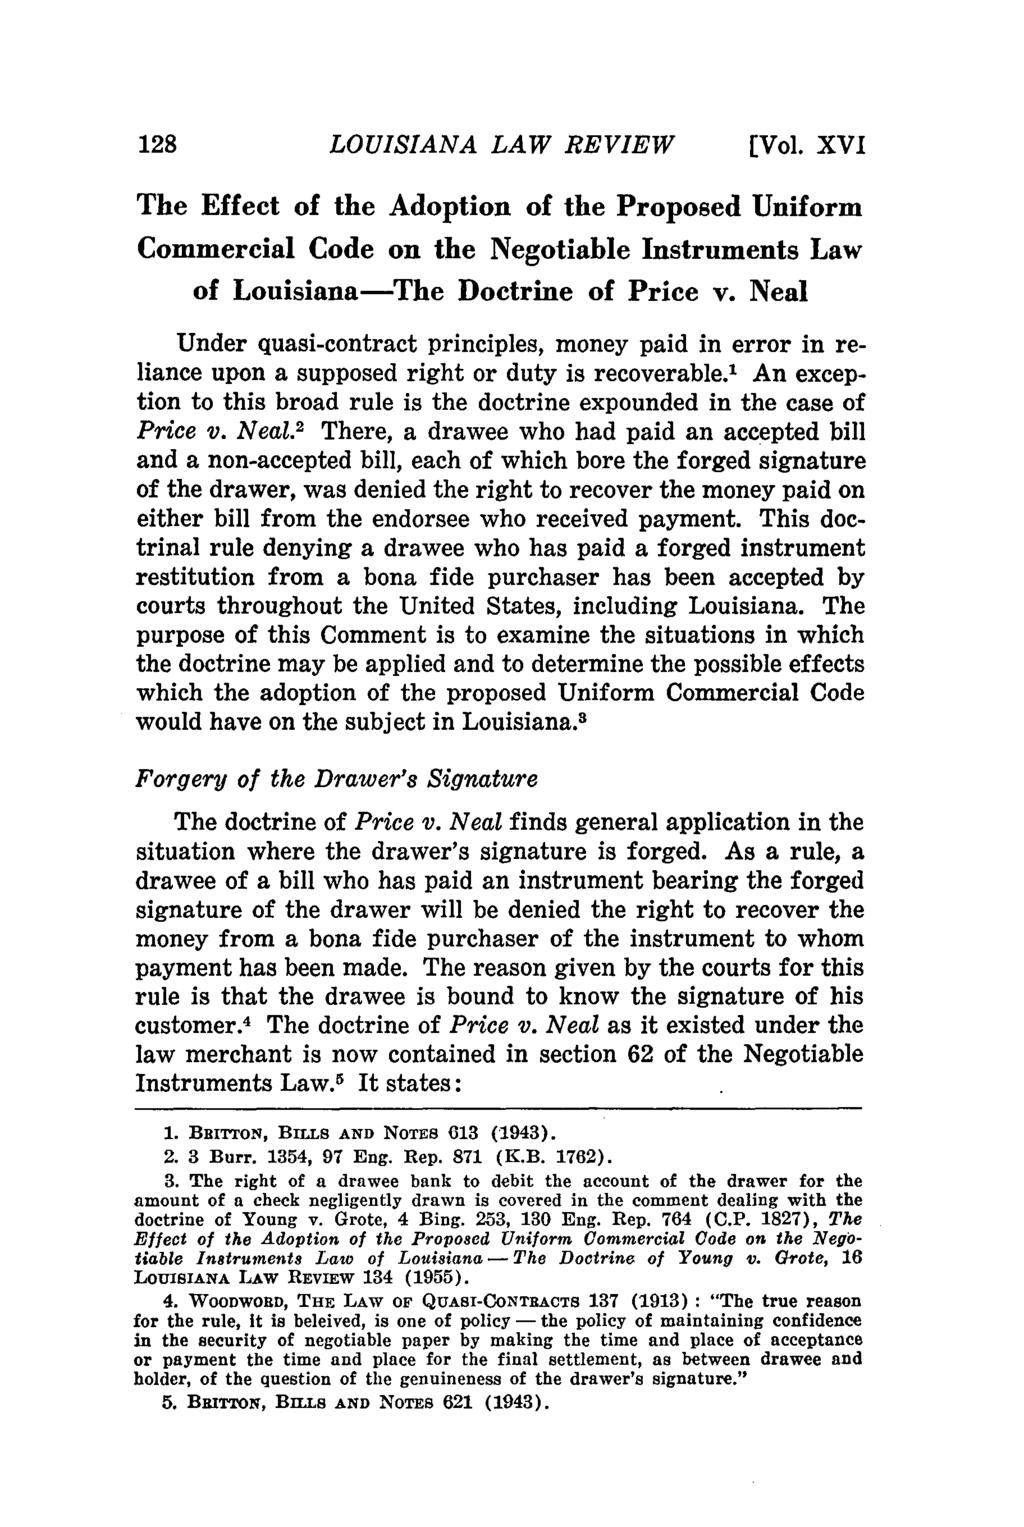 LOUISIANA LAW REVIEW [Vol. XVI The Effect of the Adoption of the Proposed Uniform Commercial Code on the Negotiable Instruments Law of Louisiana-The Doctrine of Price v.